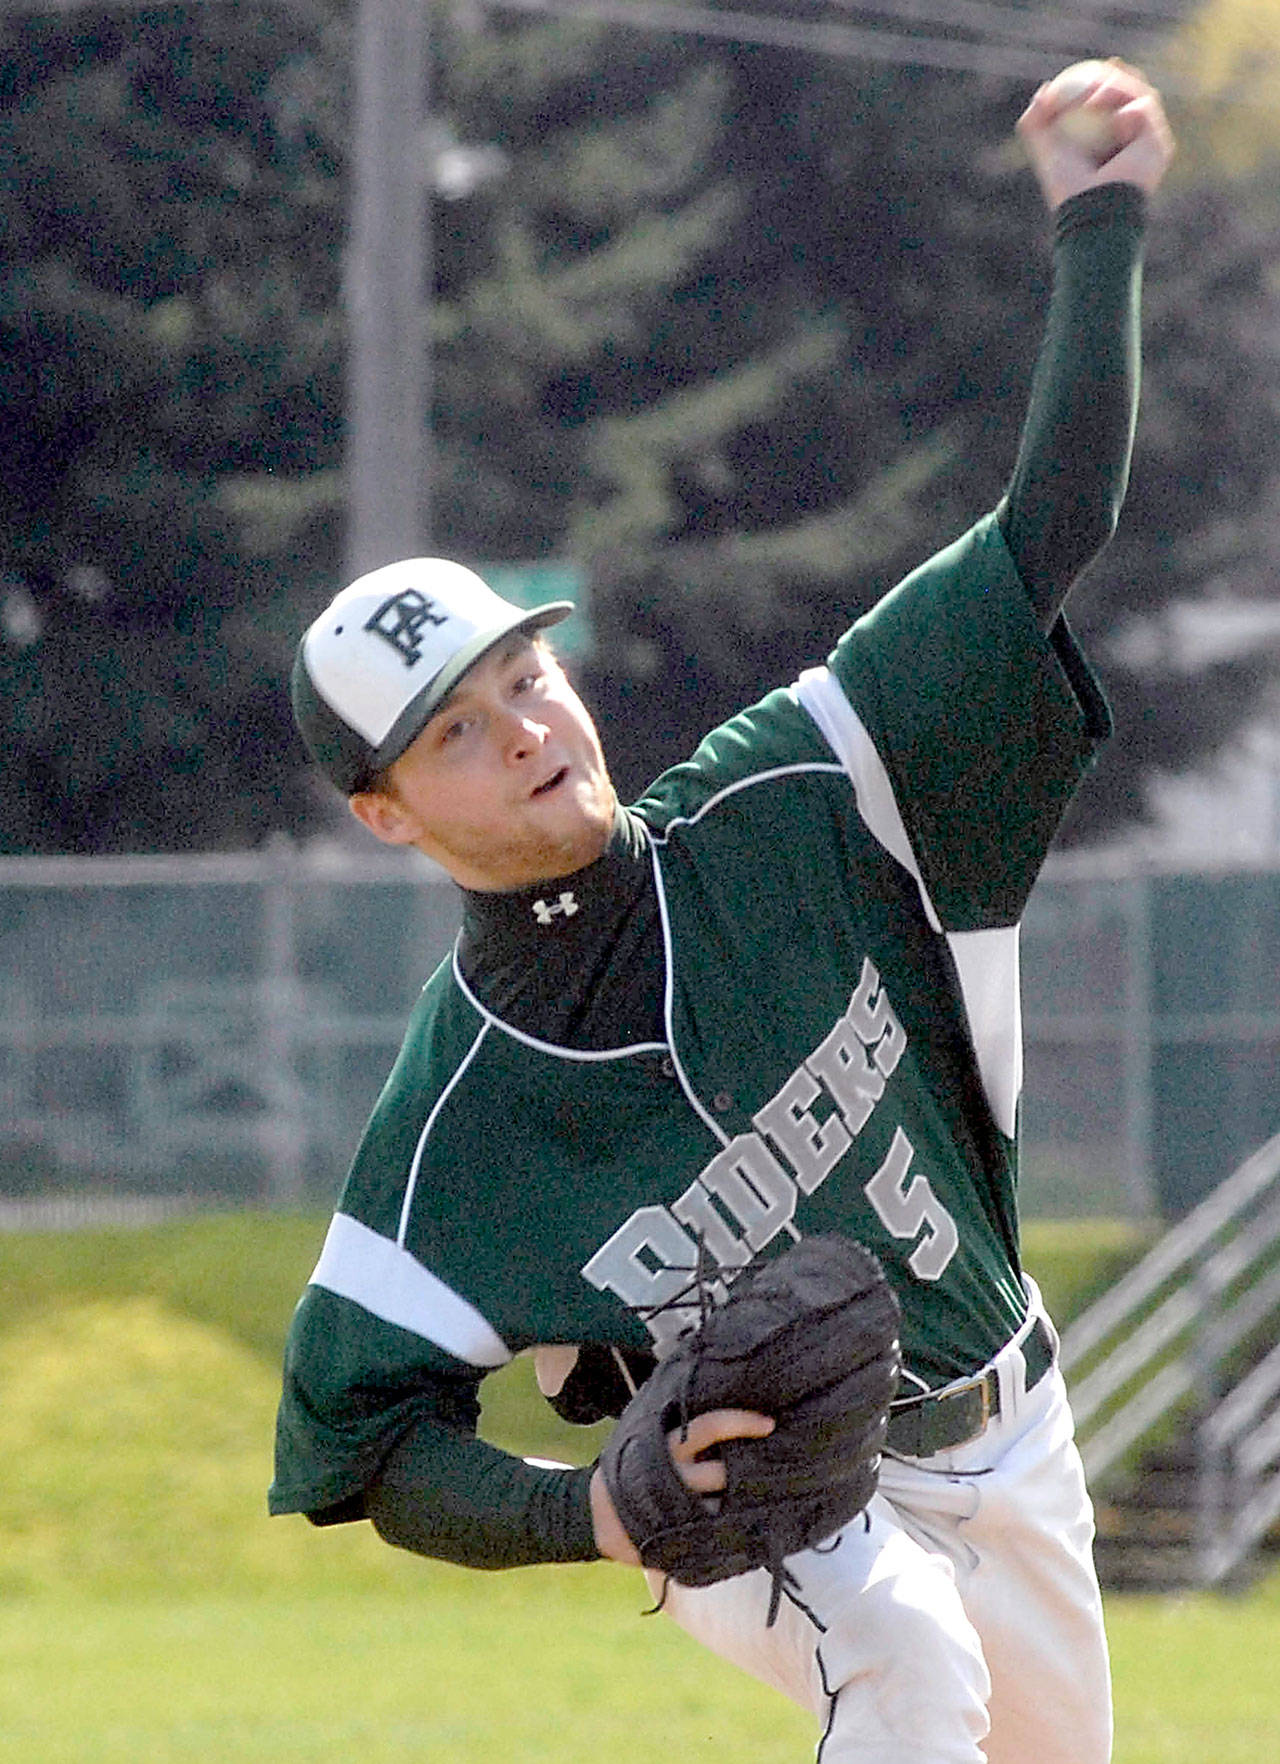 Port Angeles’ Slater Bradley pitches earlier this season. The Roughriders pitching staff has a 1.16 ERA in eight Olympic League 2A Division games this season. Port Angeles visits Sequim today (Wednesday) at 4:15 p.m.                                Keith Thorpe/Peninsula Daily News